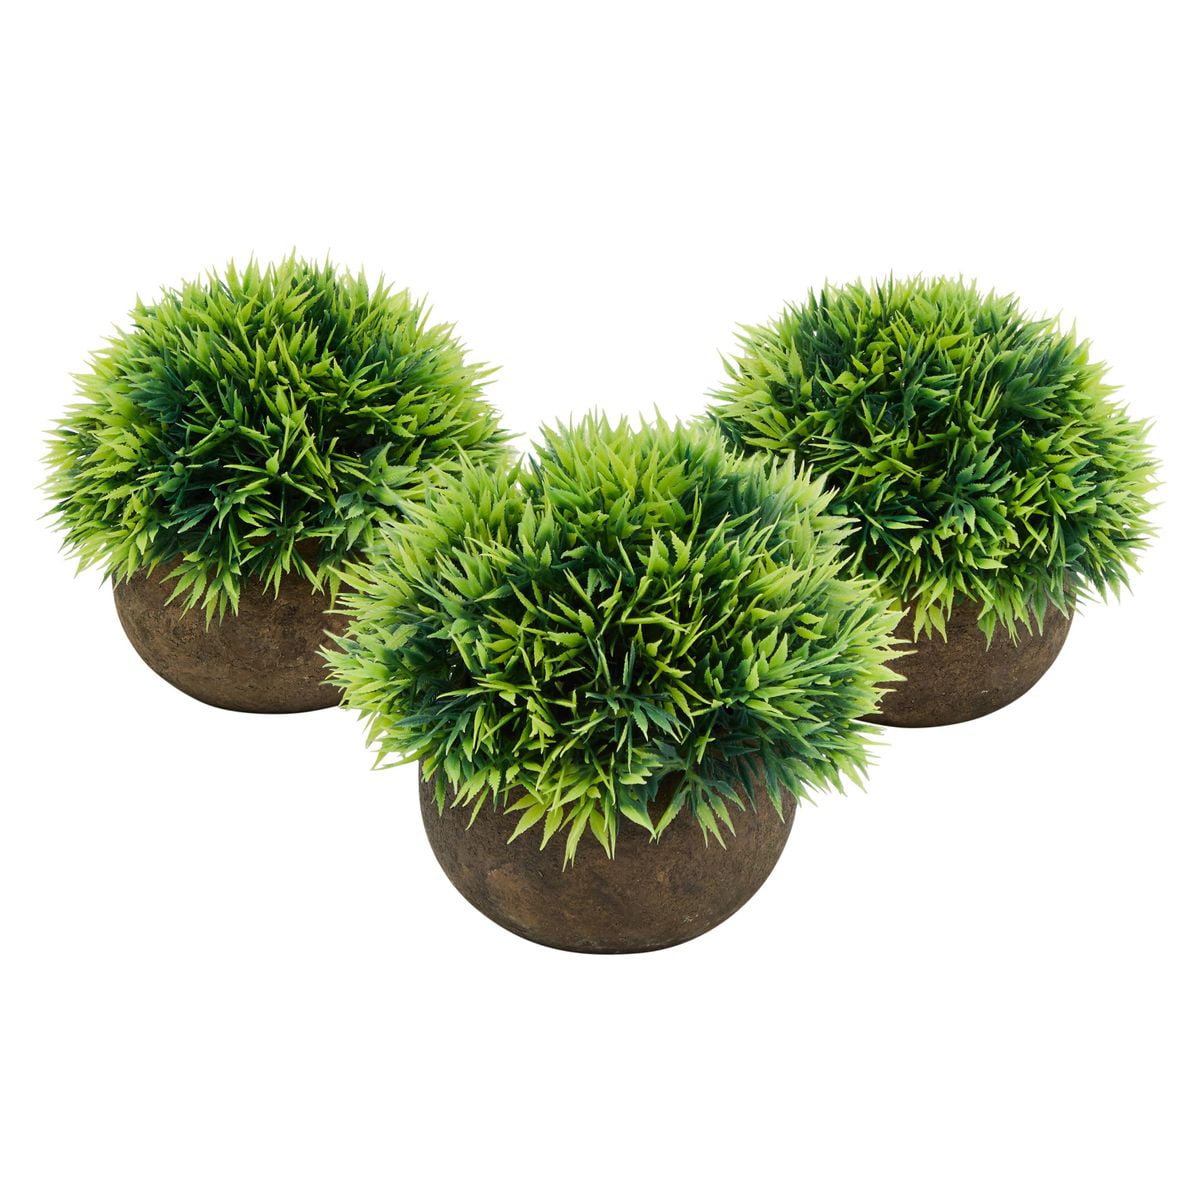 LUBERDUSH Mini Fake Potted Plants Small Artificial Plastic Greenery Faux Plant for Home Room Office Desk Décor Indoor 3 Packs